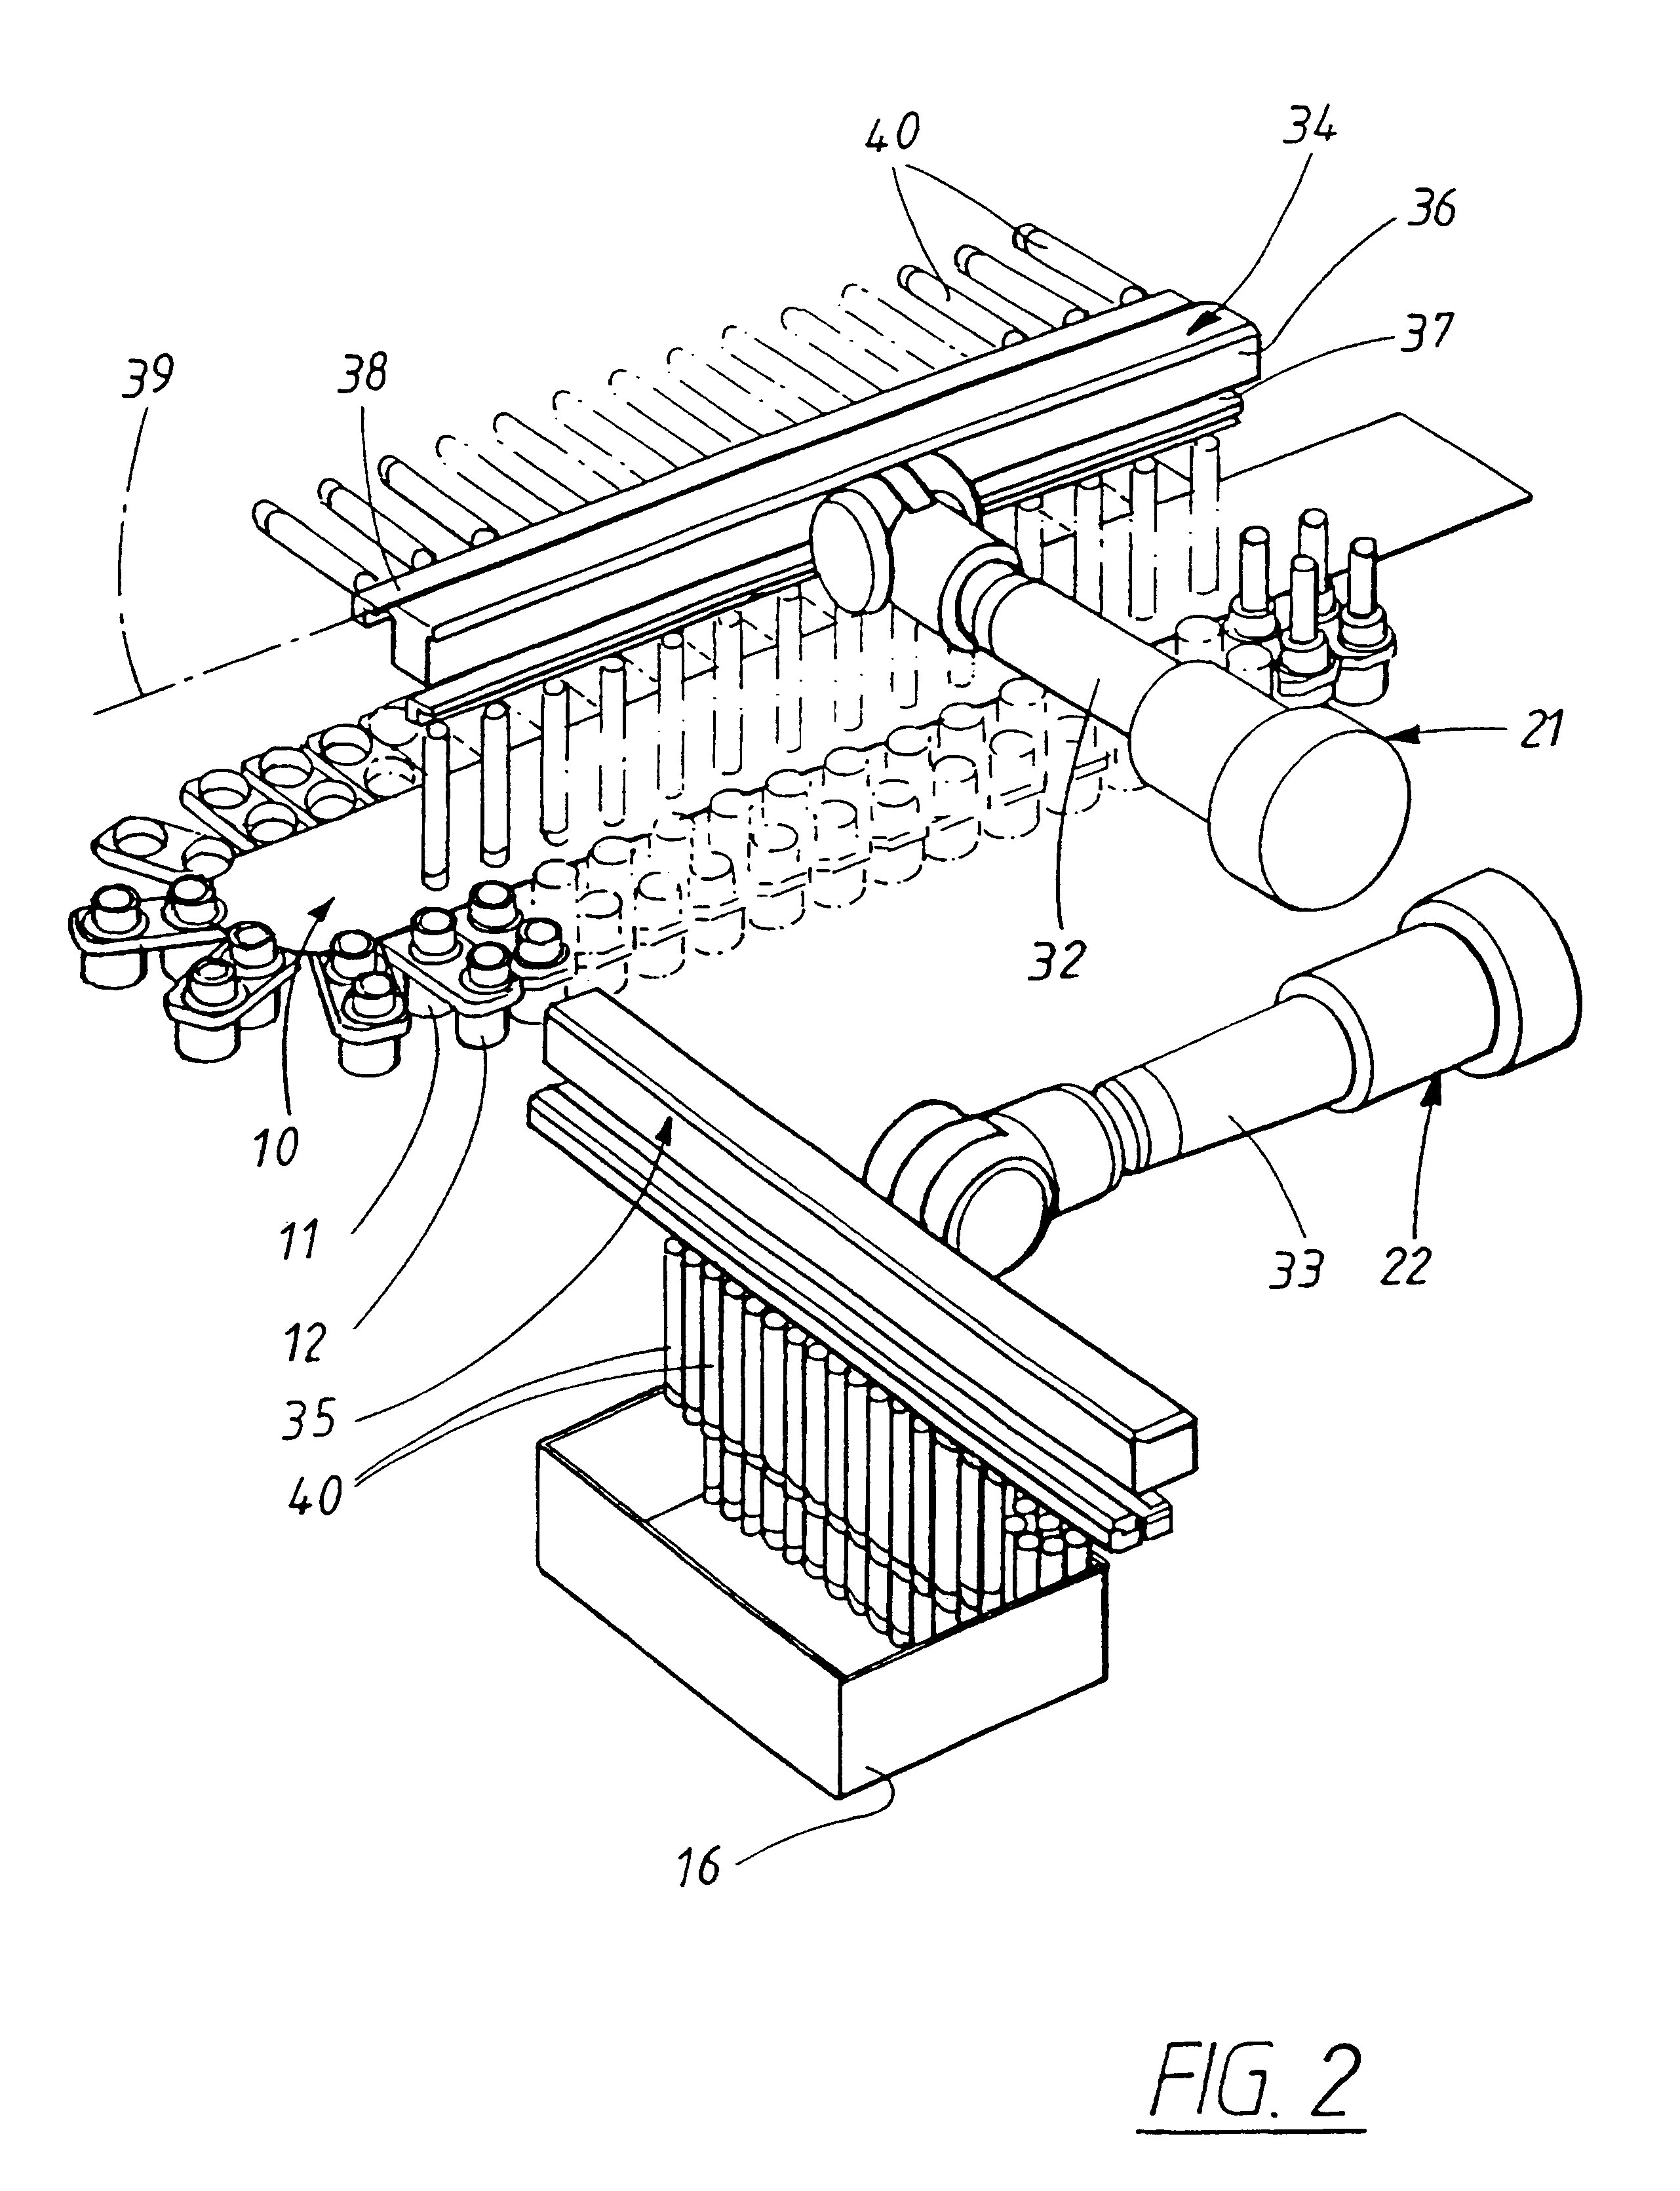 Feeder for a tube-filling machine